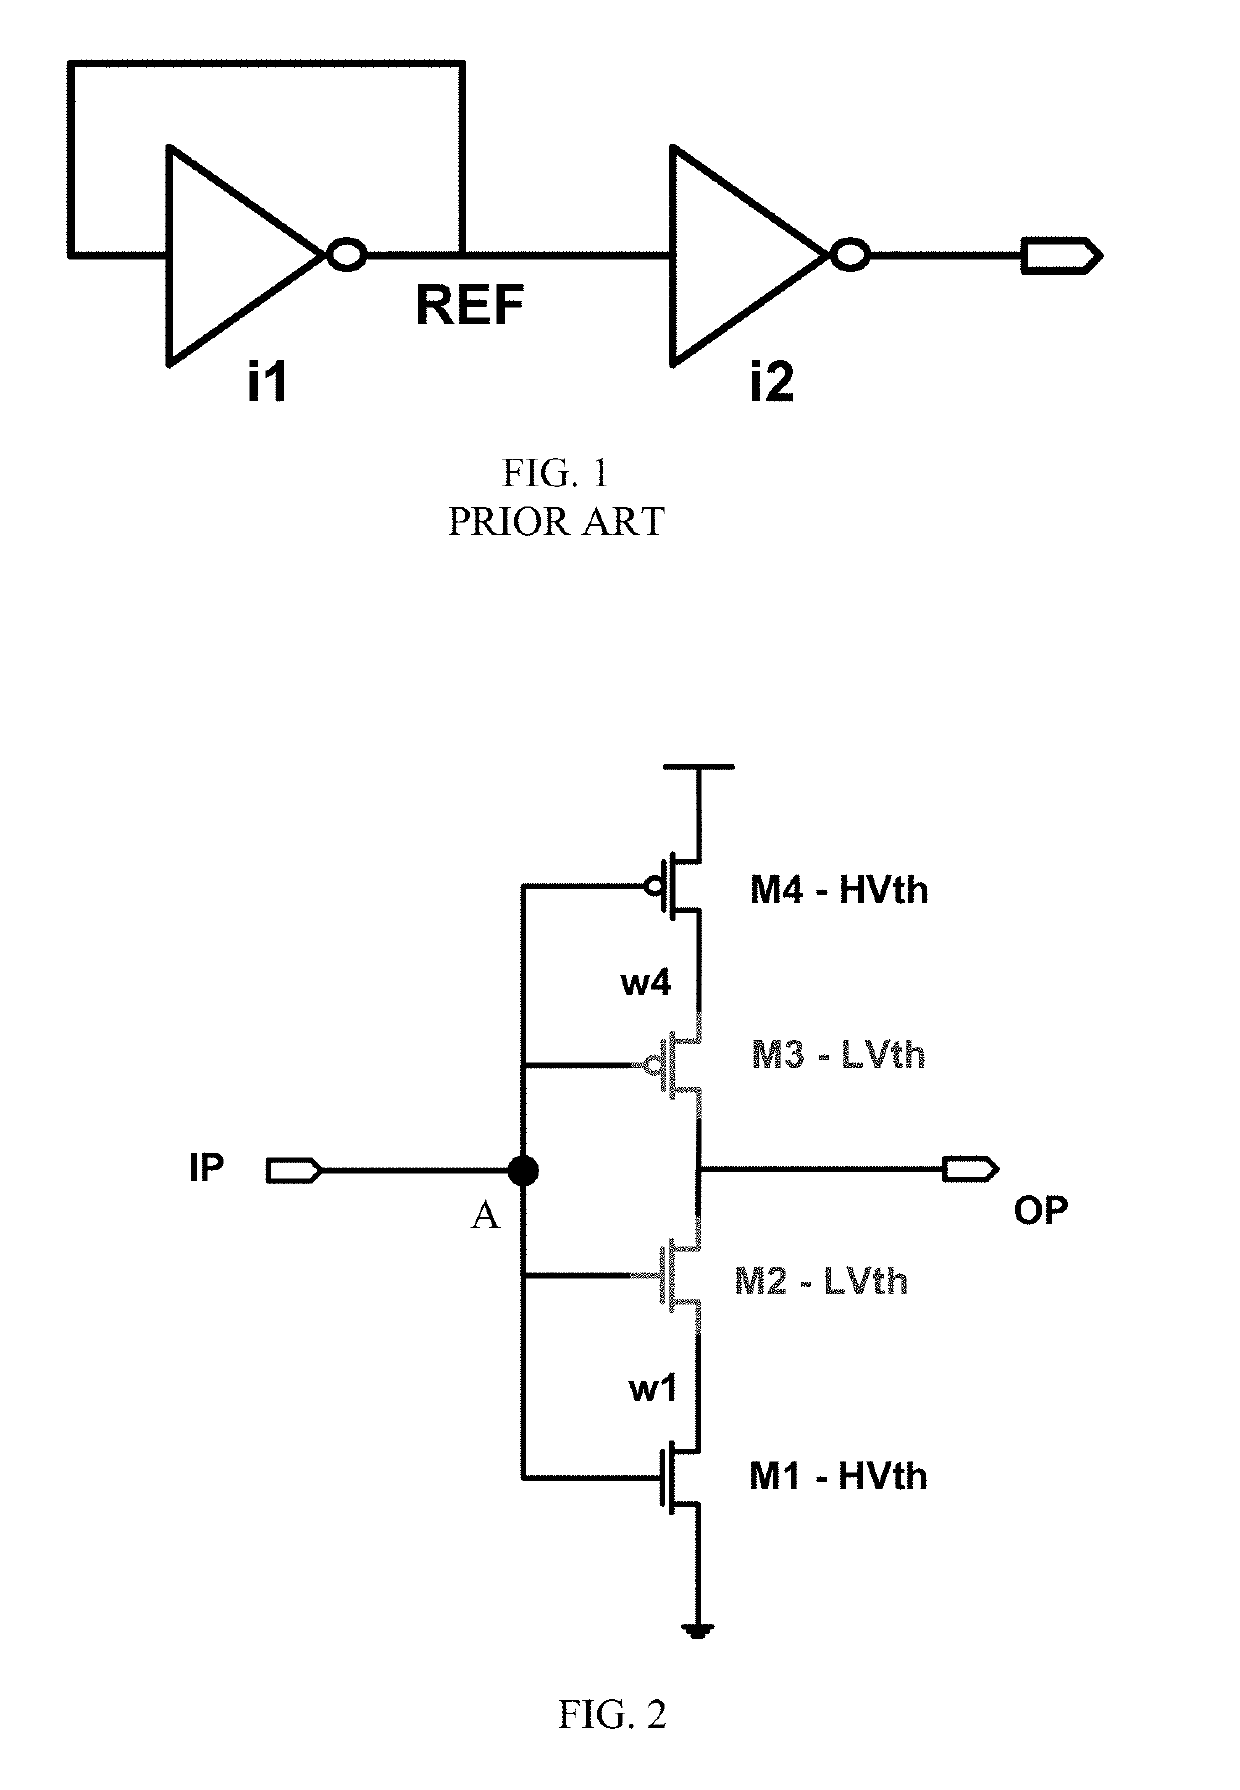 Physical unclonable functions related to inverter trip points